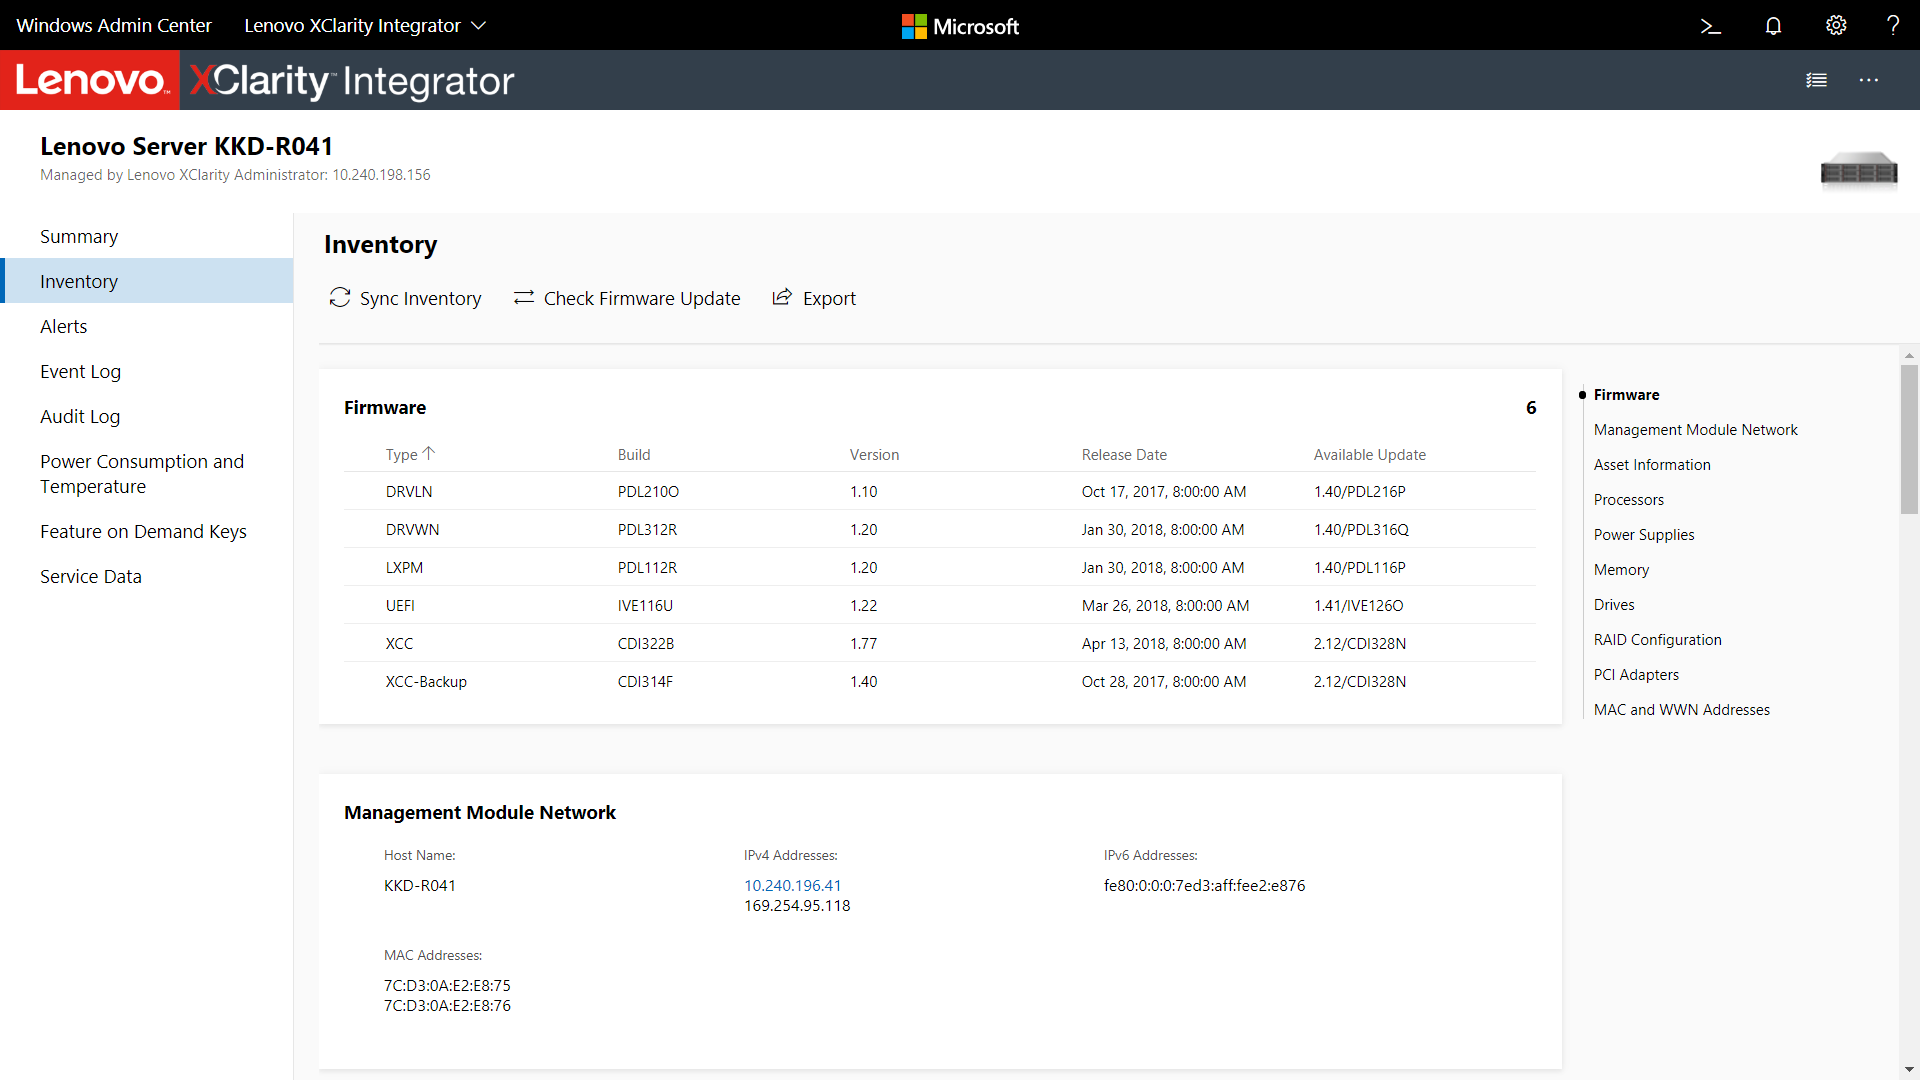 Screenshot of the Lenovo XClarity Integrator extension in Windows Admin Center showing the Inventory page.